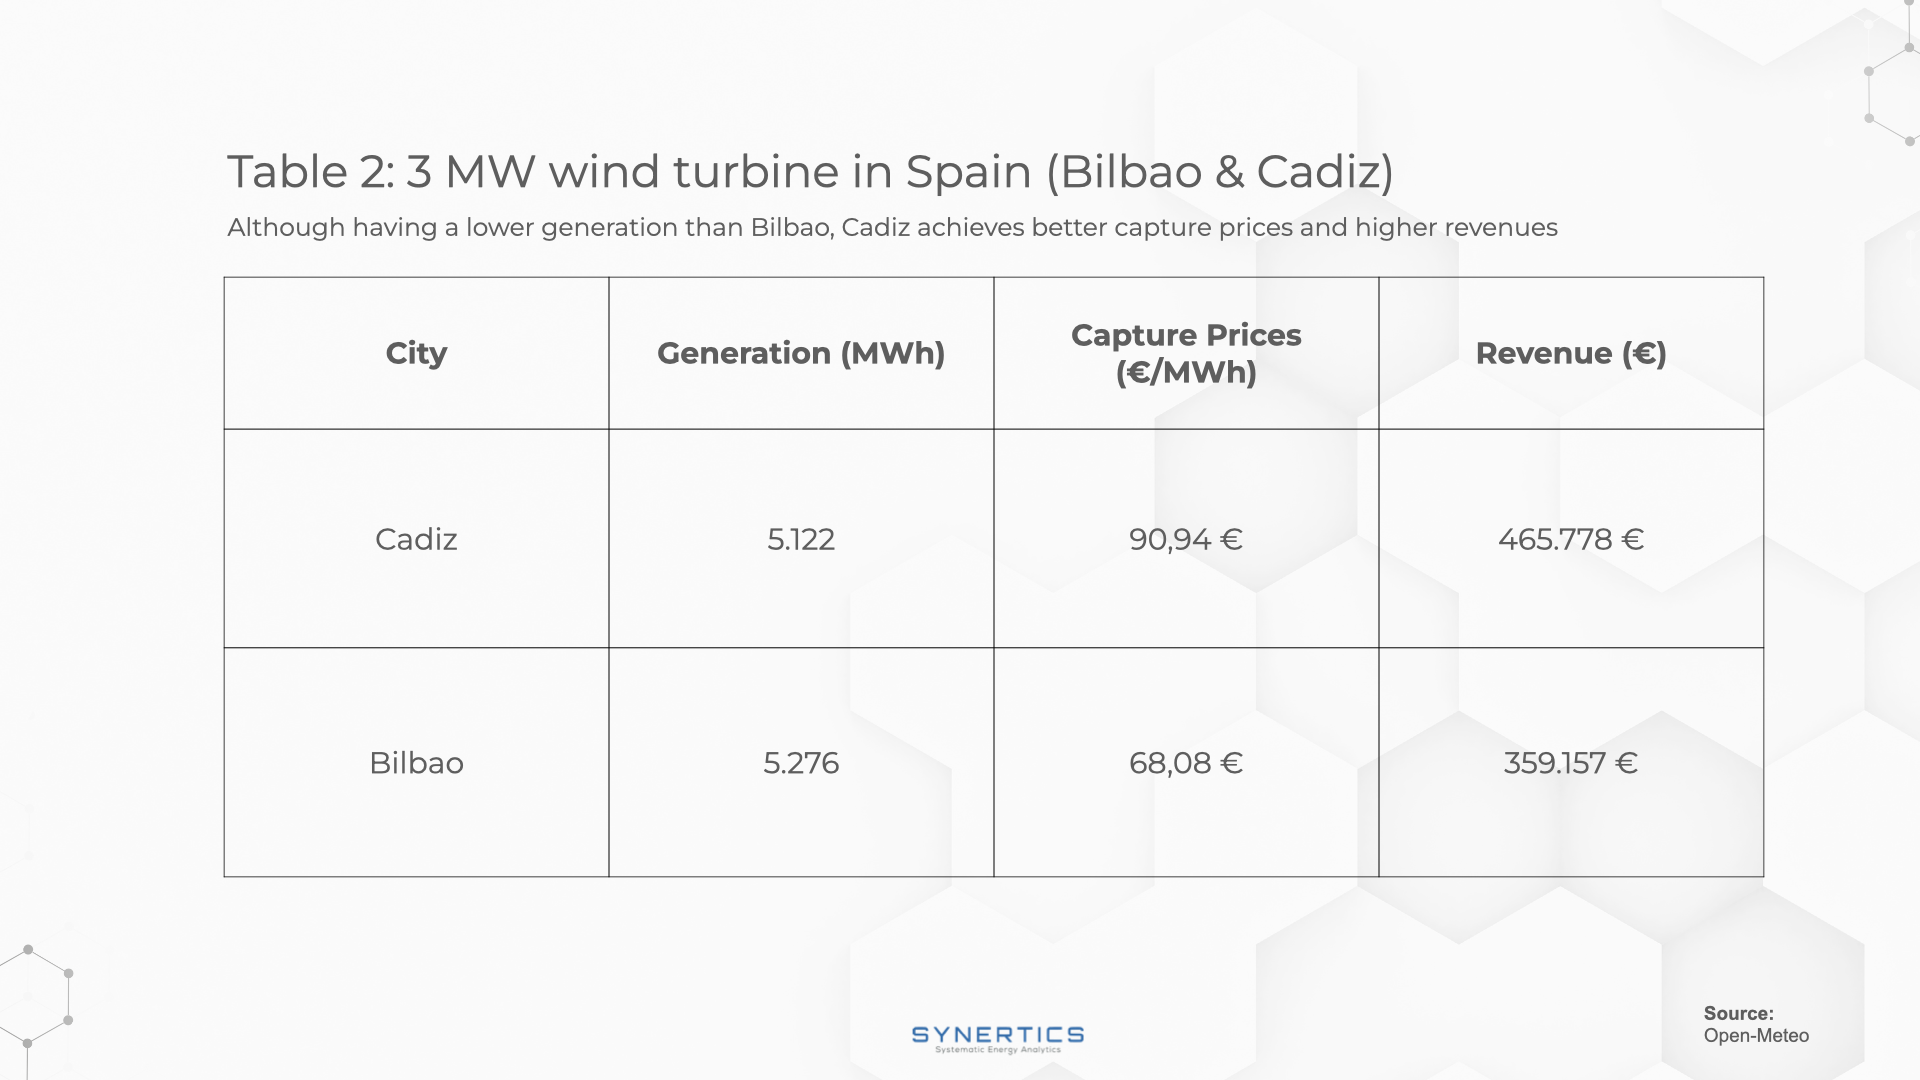 Revenues, Capture prices and generation of a 3MW wind turbine in Bilbao and Cadiz